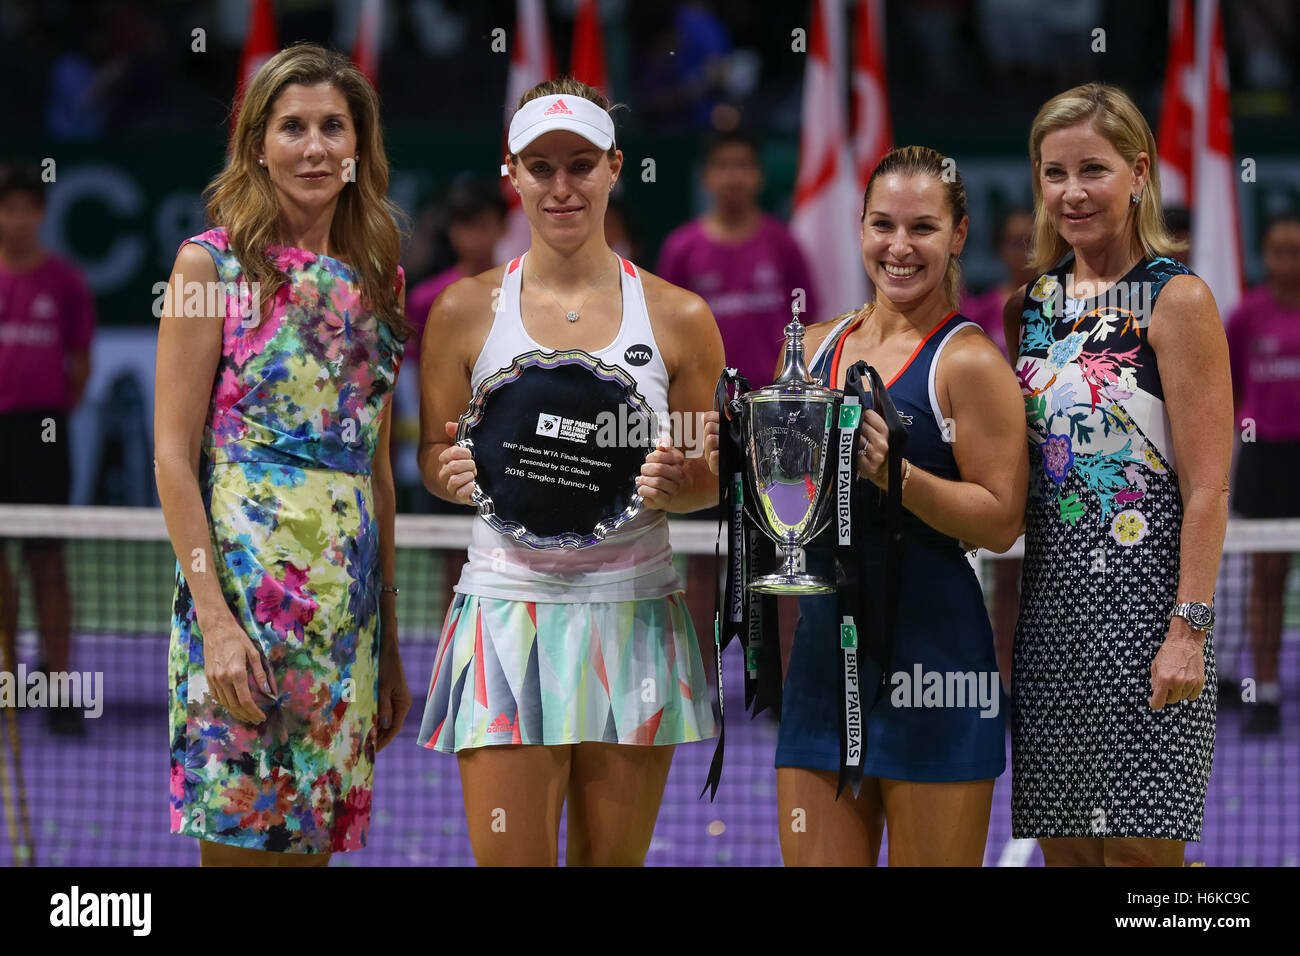 Singapore indoor stadium, Singapore. 30th October, 2016. BNP Paribas WTA finals women tennis association .Slovakian player Dominika Cibulkova and German player Angelique Kerber are holding their trophees together with former players Monica Seles and Chris Evert Credit:  Yan Lerval/Alamy Live News Stock Photo